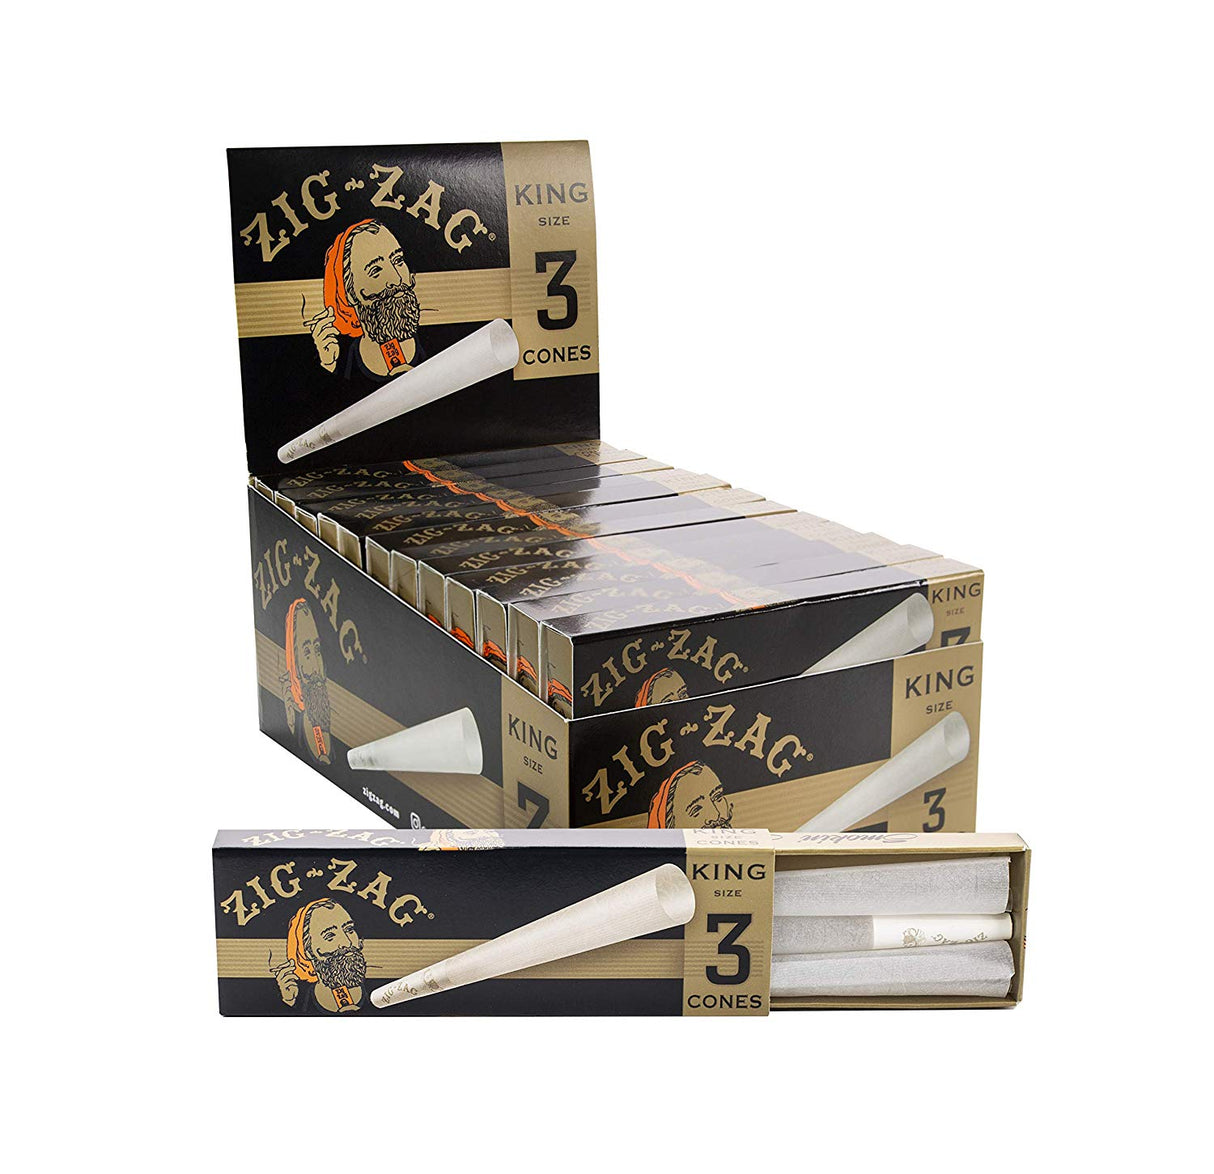 Zig Zag 1 1/4 Size King Size Rolling Paper (24 Booklet Carton)